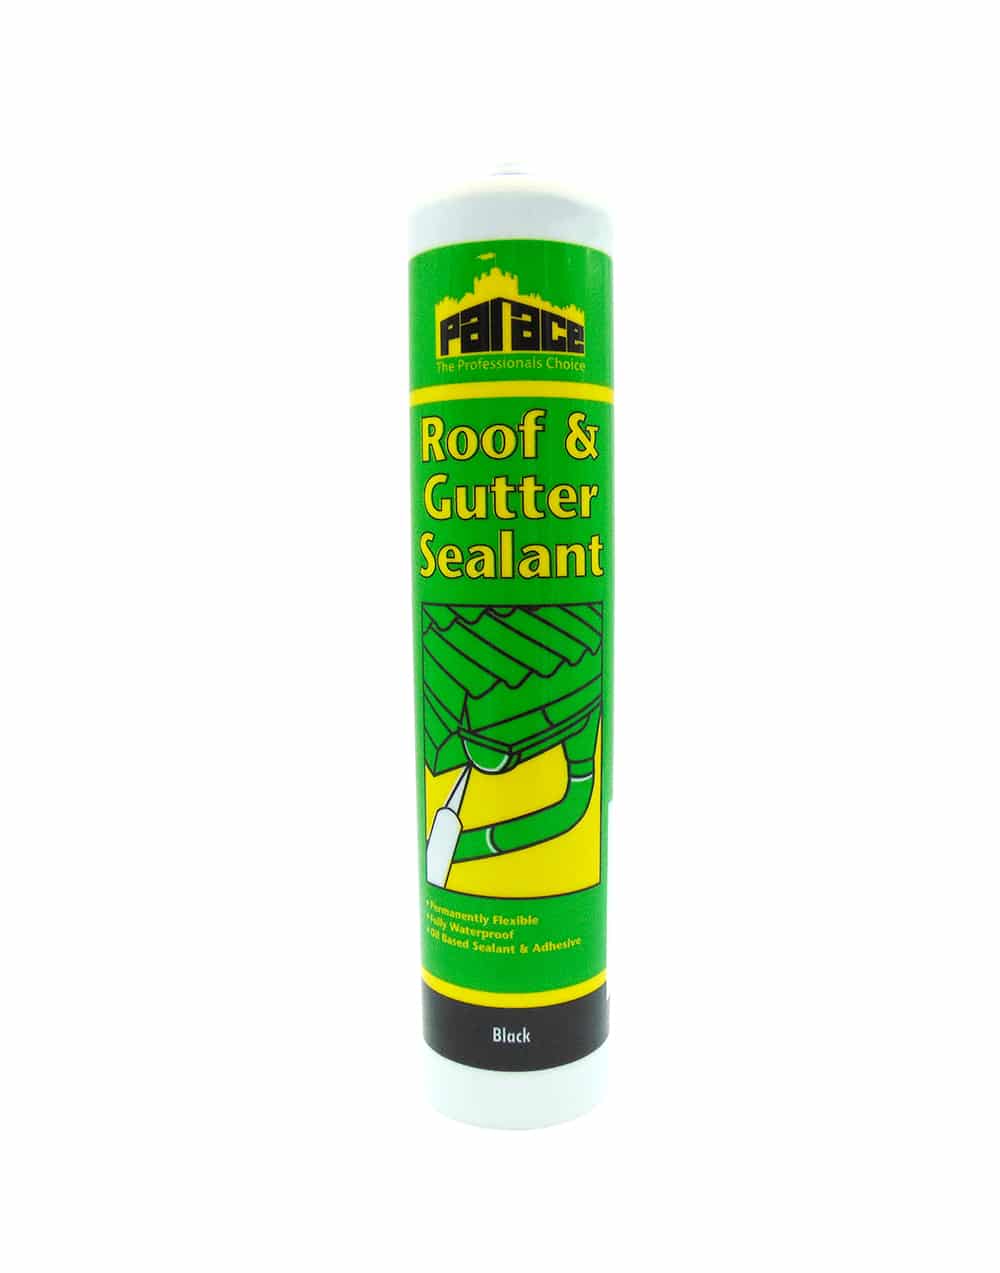 Palace ROOF & GUTTER Sealant